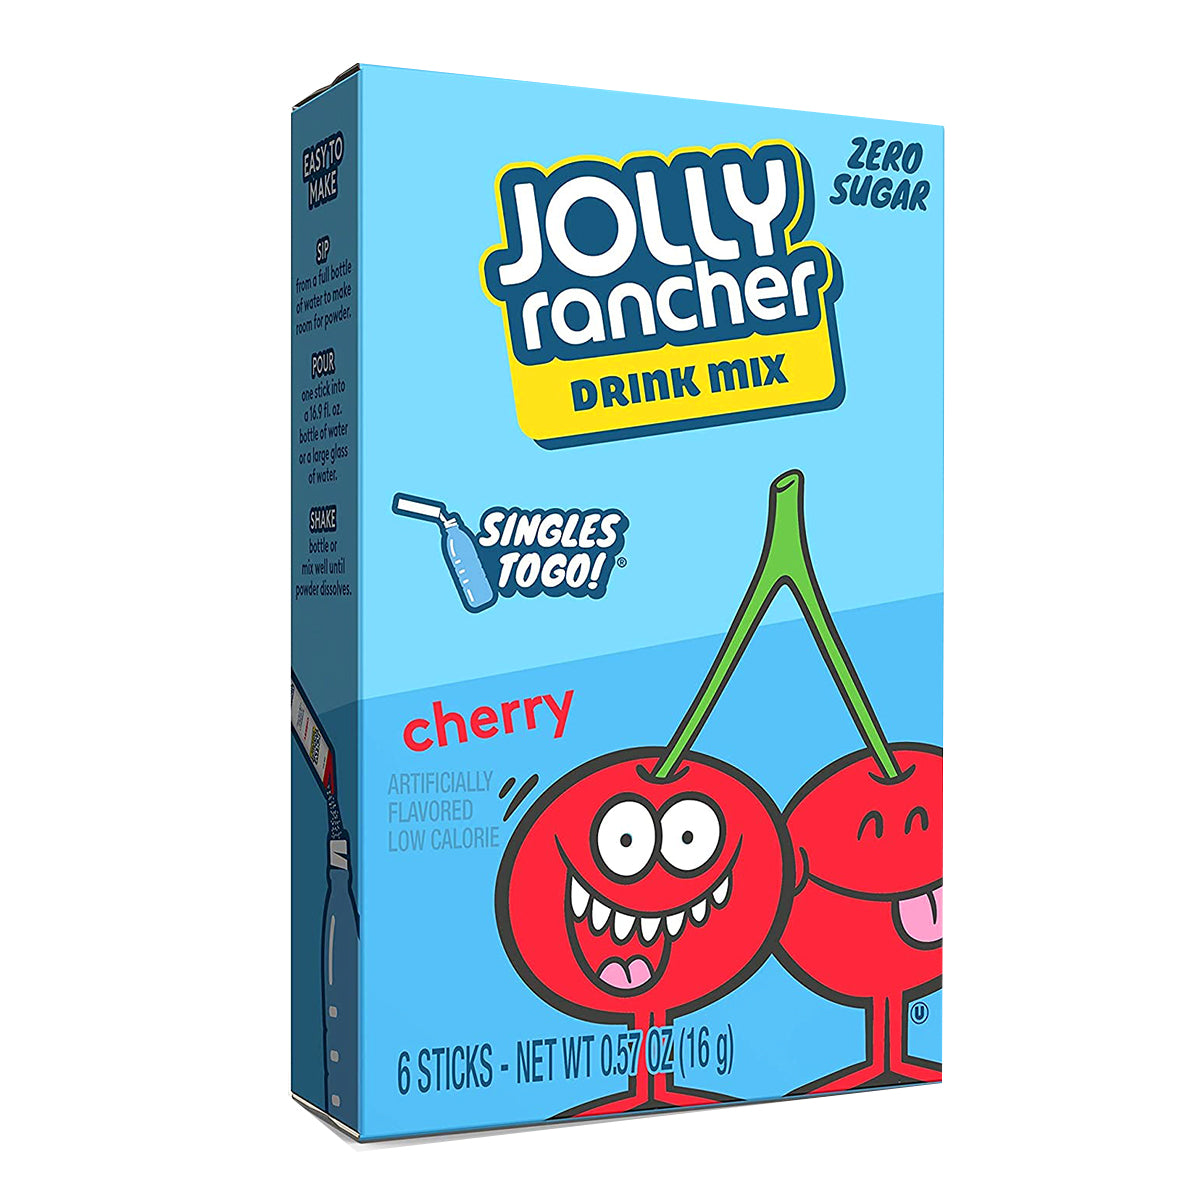 jolly rancher singles to go powdered drink mix - cherry - 6ct